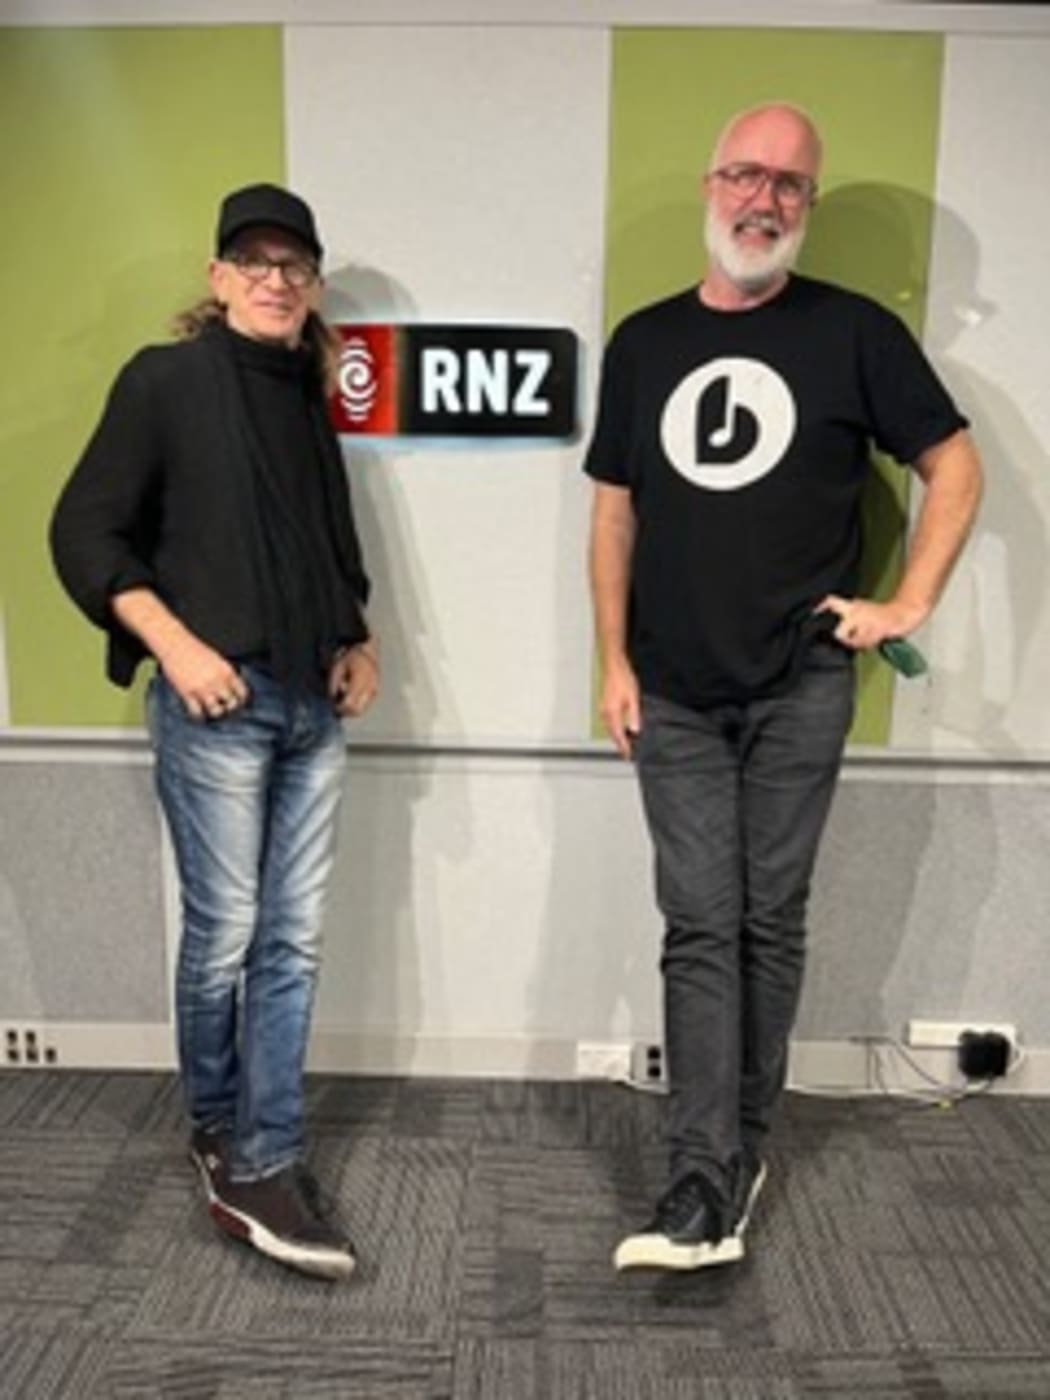 Trevor Reekie and Joost Langeveld pose in front of the RNZ sign at RNZ Auckland